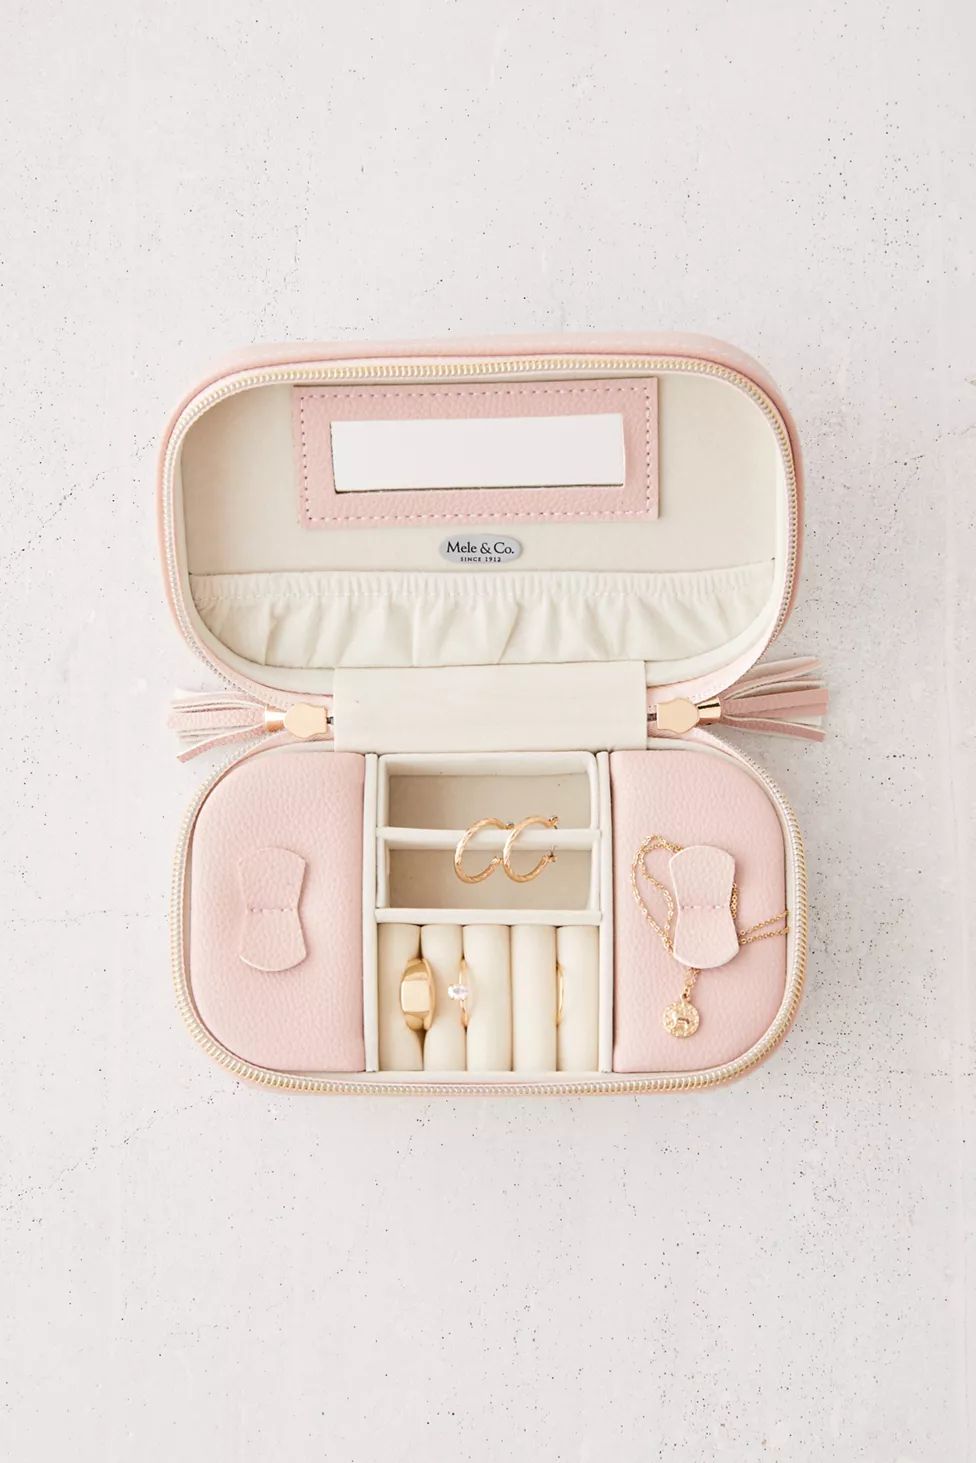 Mele & Co. Lucy Travel Jewelry Box | Urban Outfitters (US and RoW)